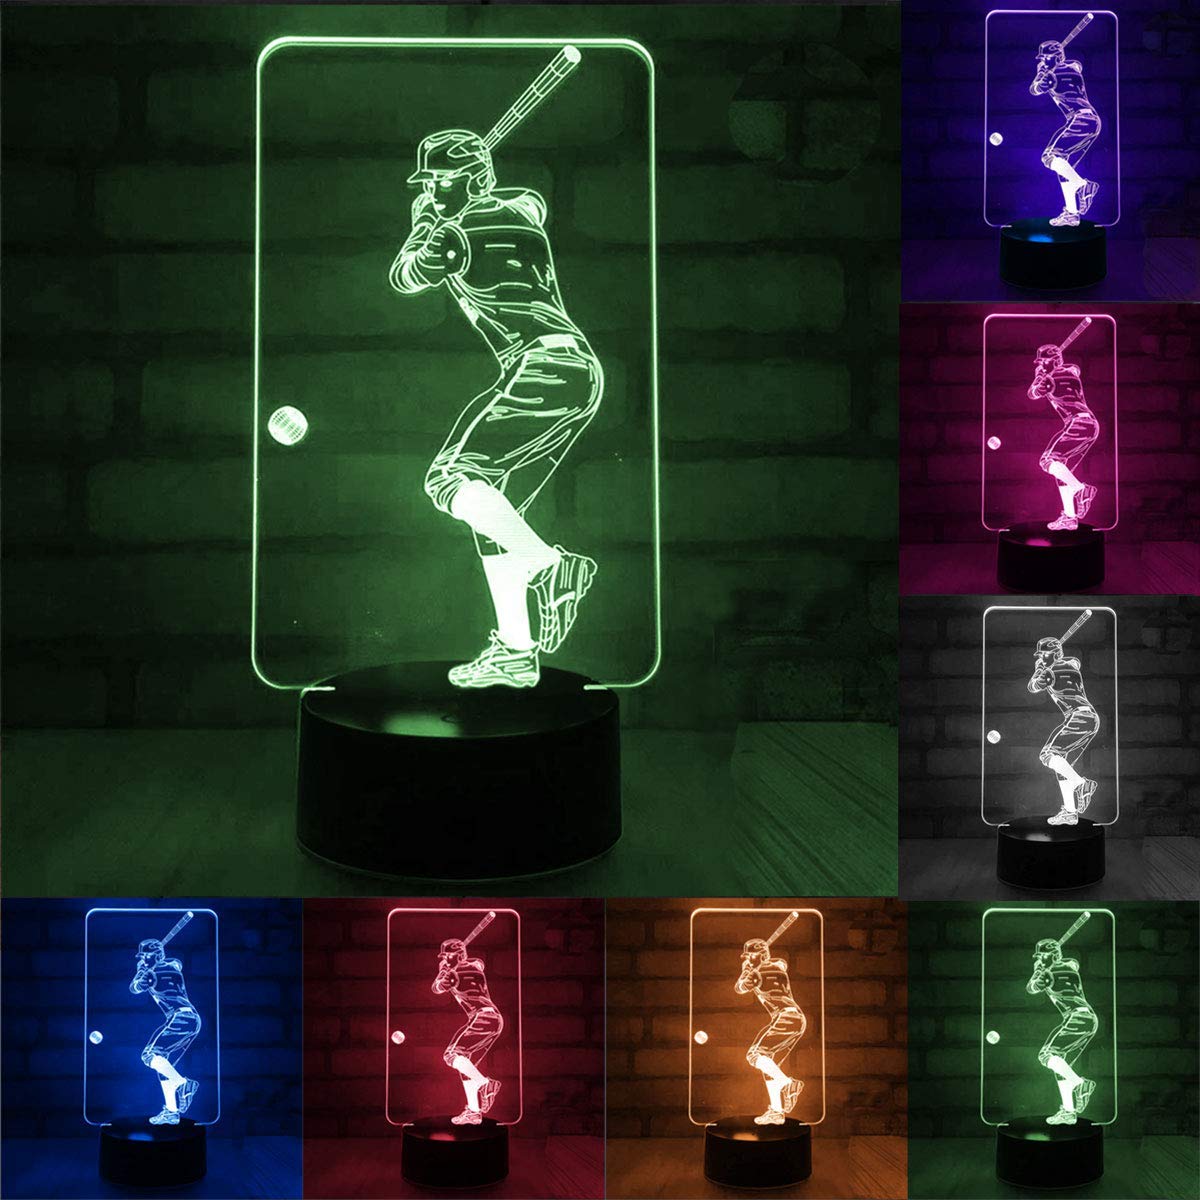 3D Remote Night Stand Light, EpicGadget Touch Control Optical Illusion Visualization LED Night Light Lamp 7 Colors Changing Remote Control Night Light Lamp Stand (Baseball Player) - image 2 of 3